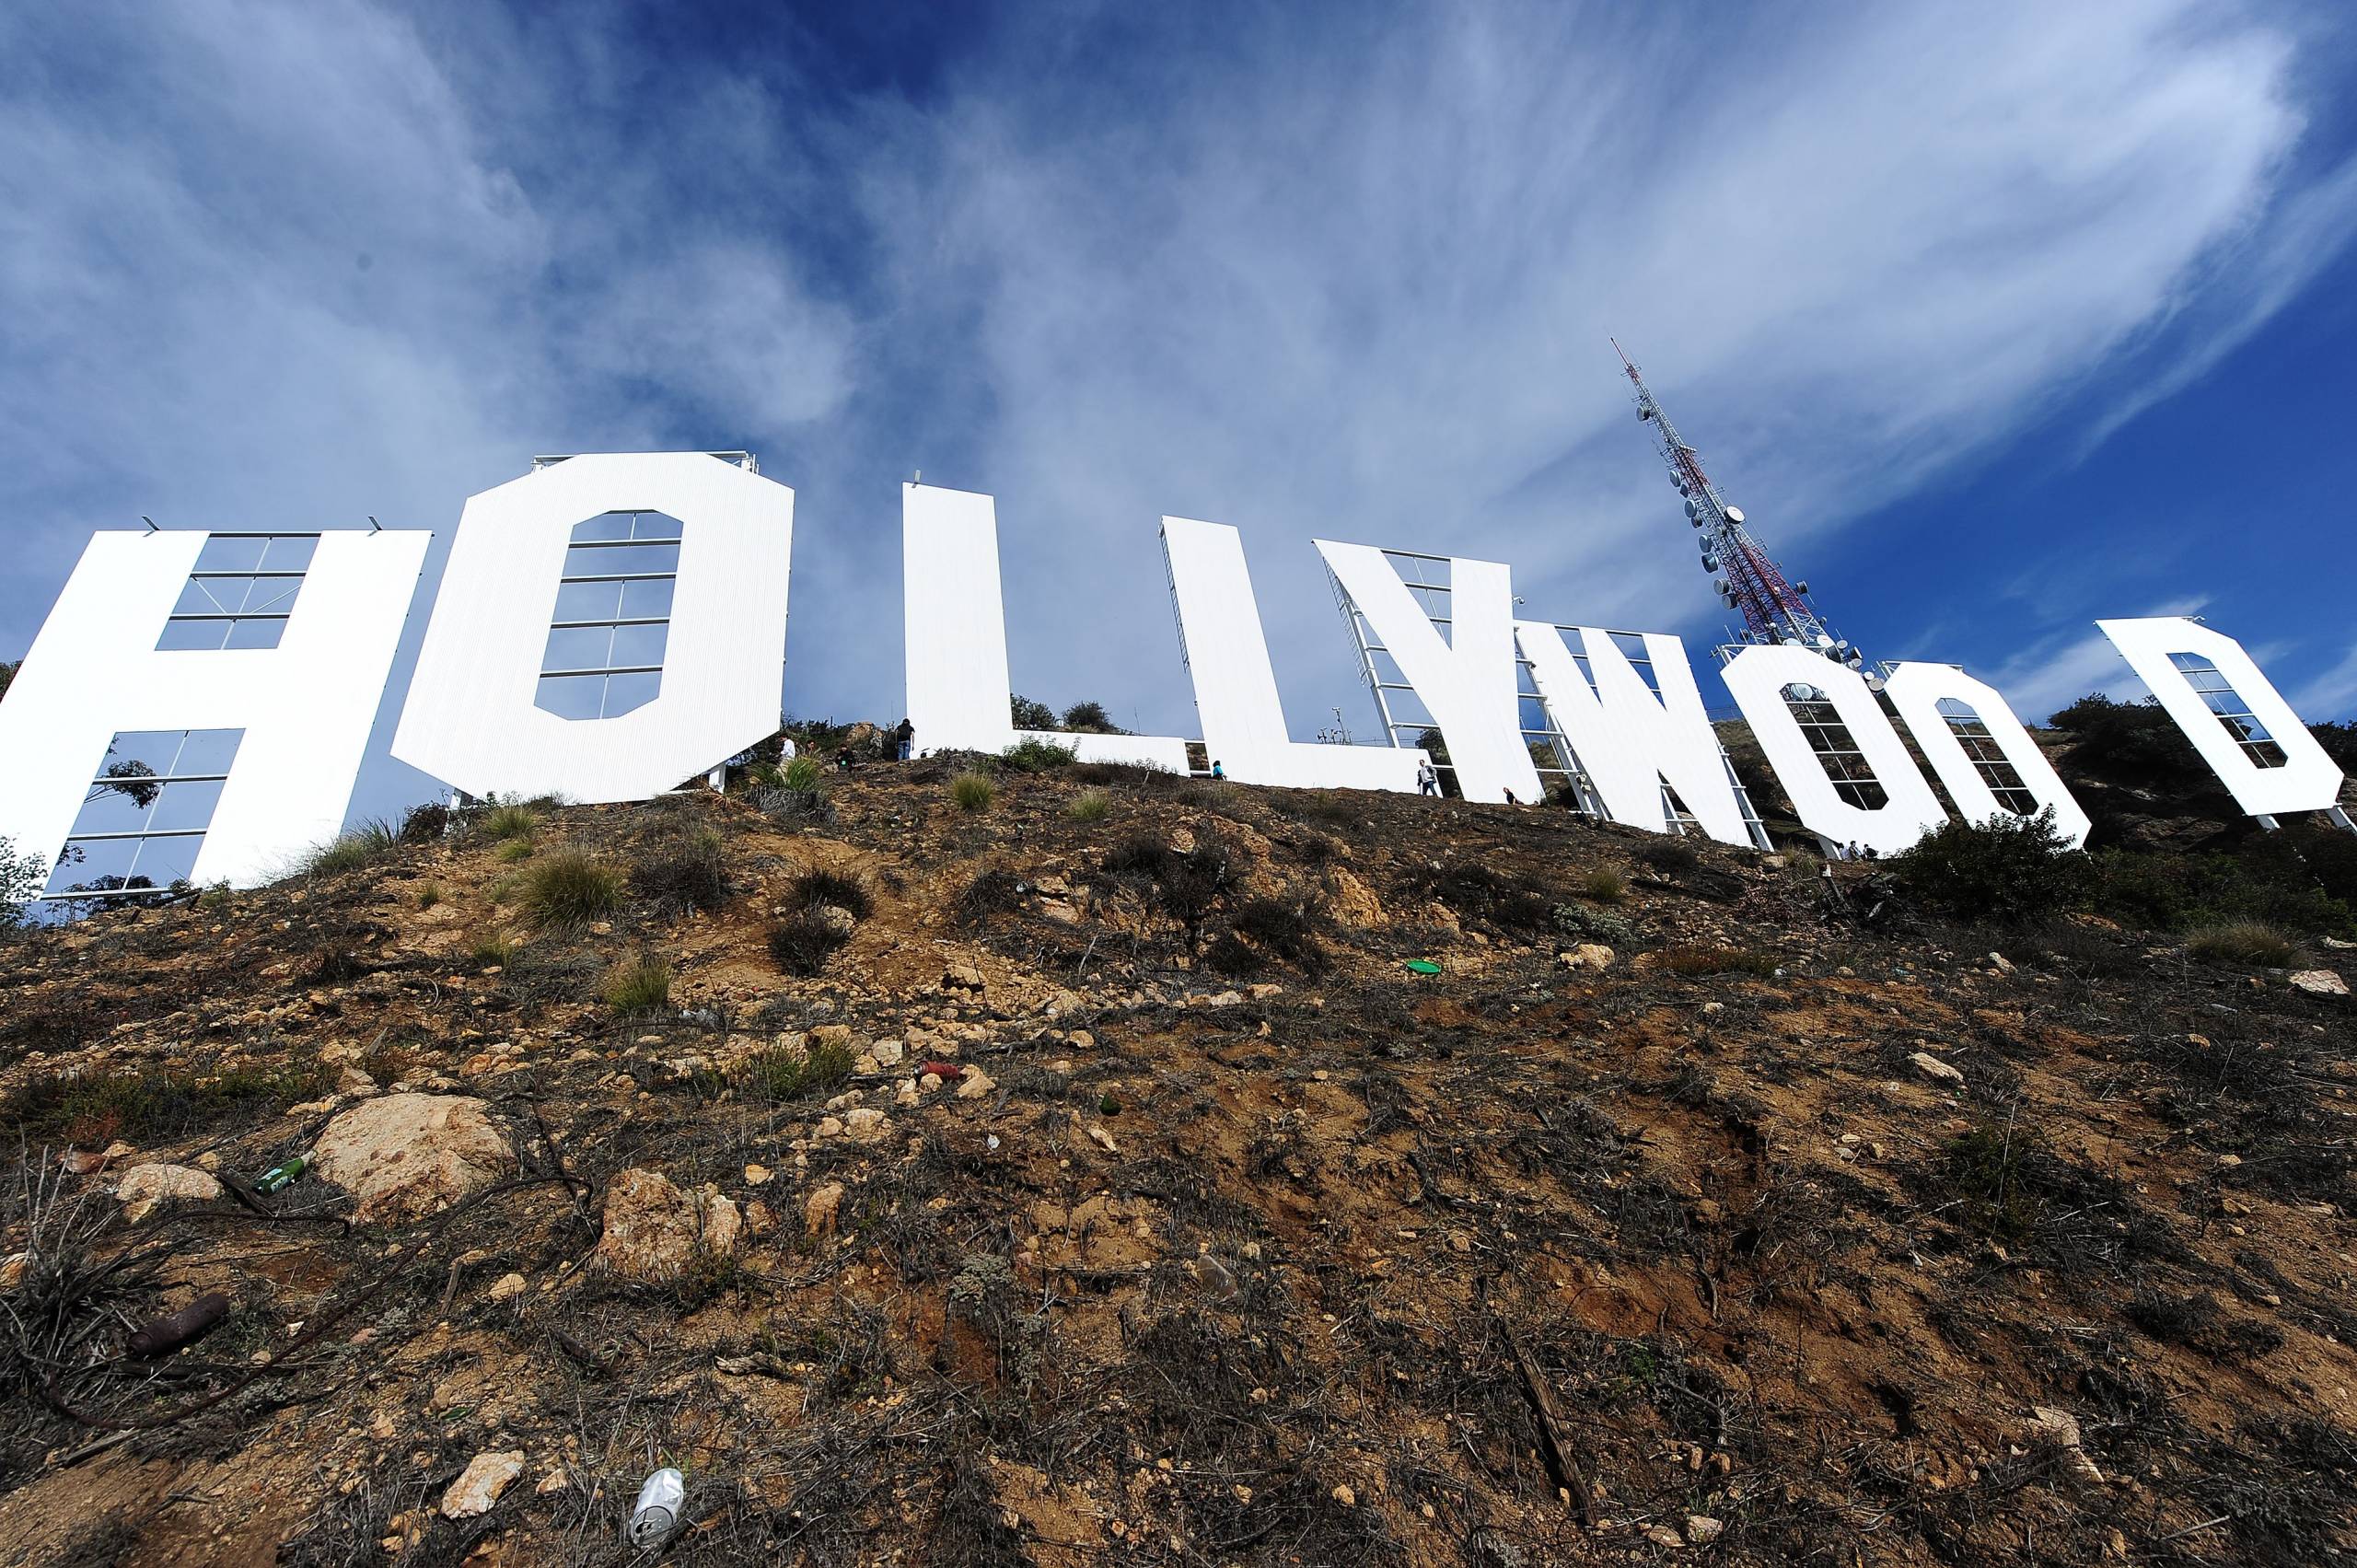 The stories-high, bright-white letters of the Hollywood sign are seen from the ground directly below, filling the entire frame.